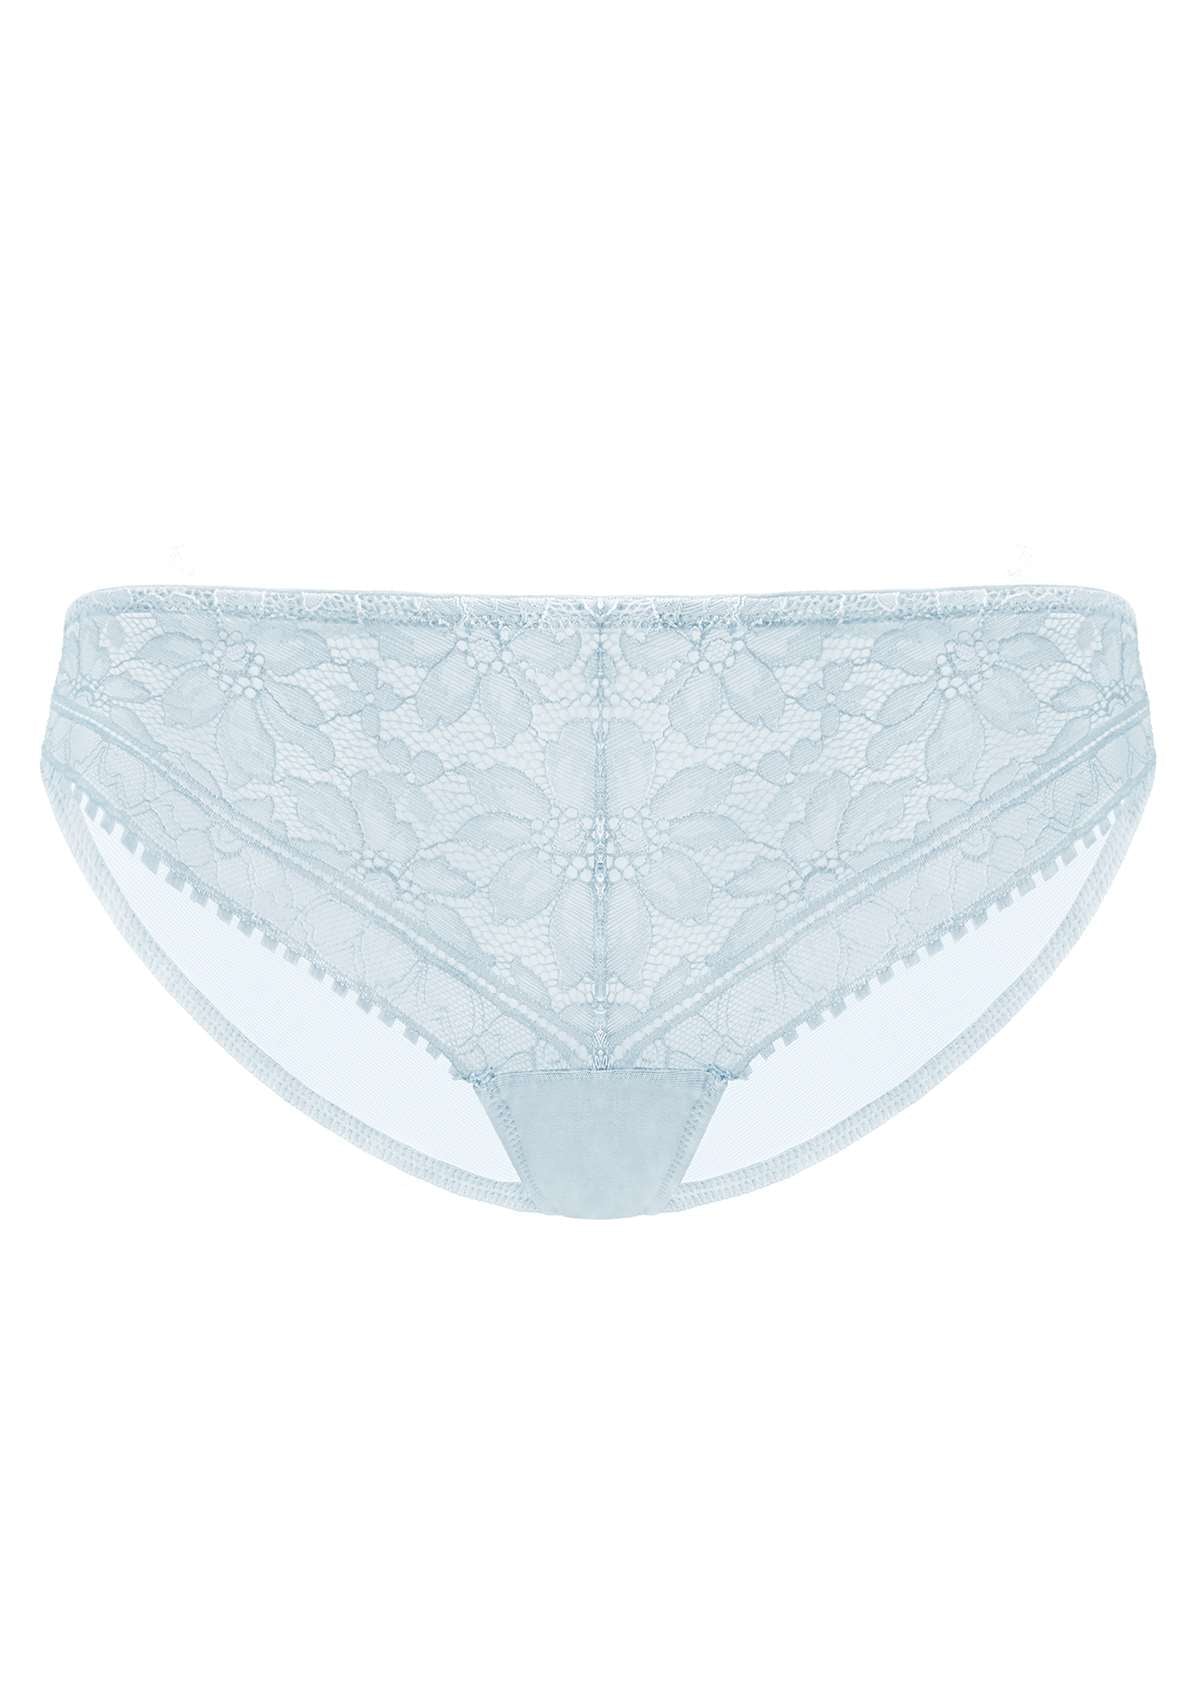 HSIA Silene Sheer Lace Mesh Hipster Underwear 3 Pack - XL / Light Blue+Champagne+Light Pink